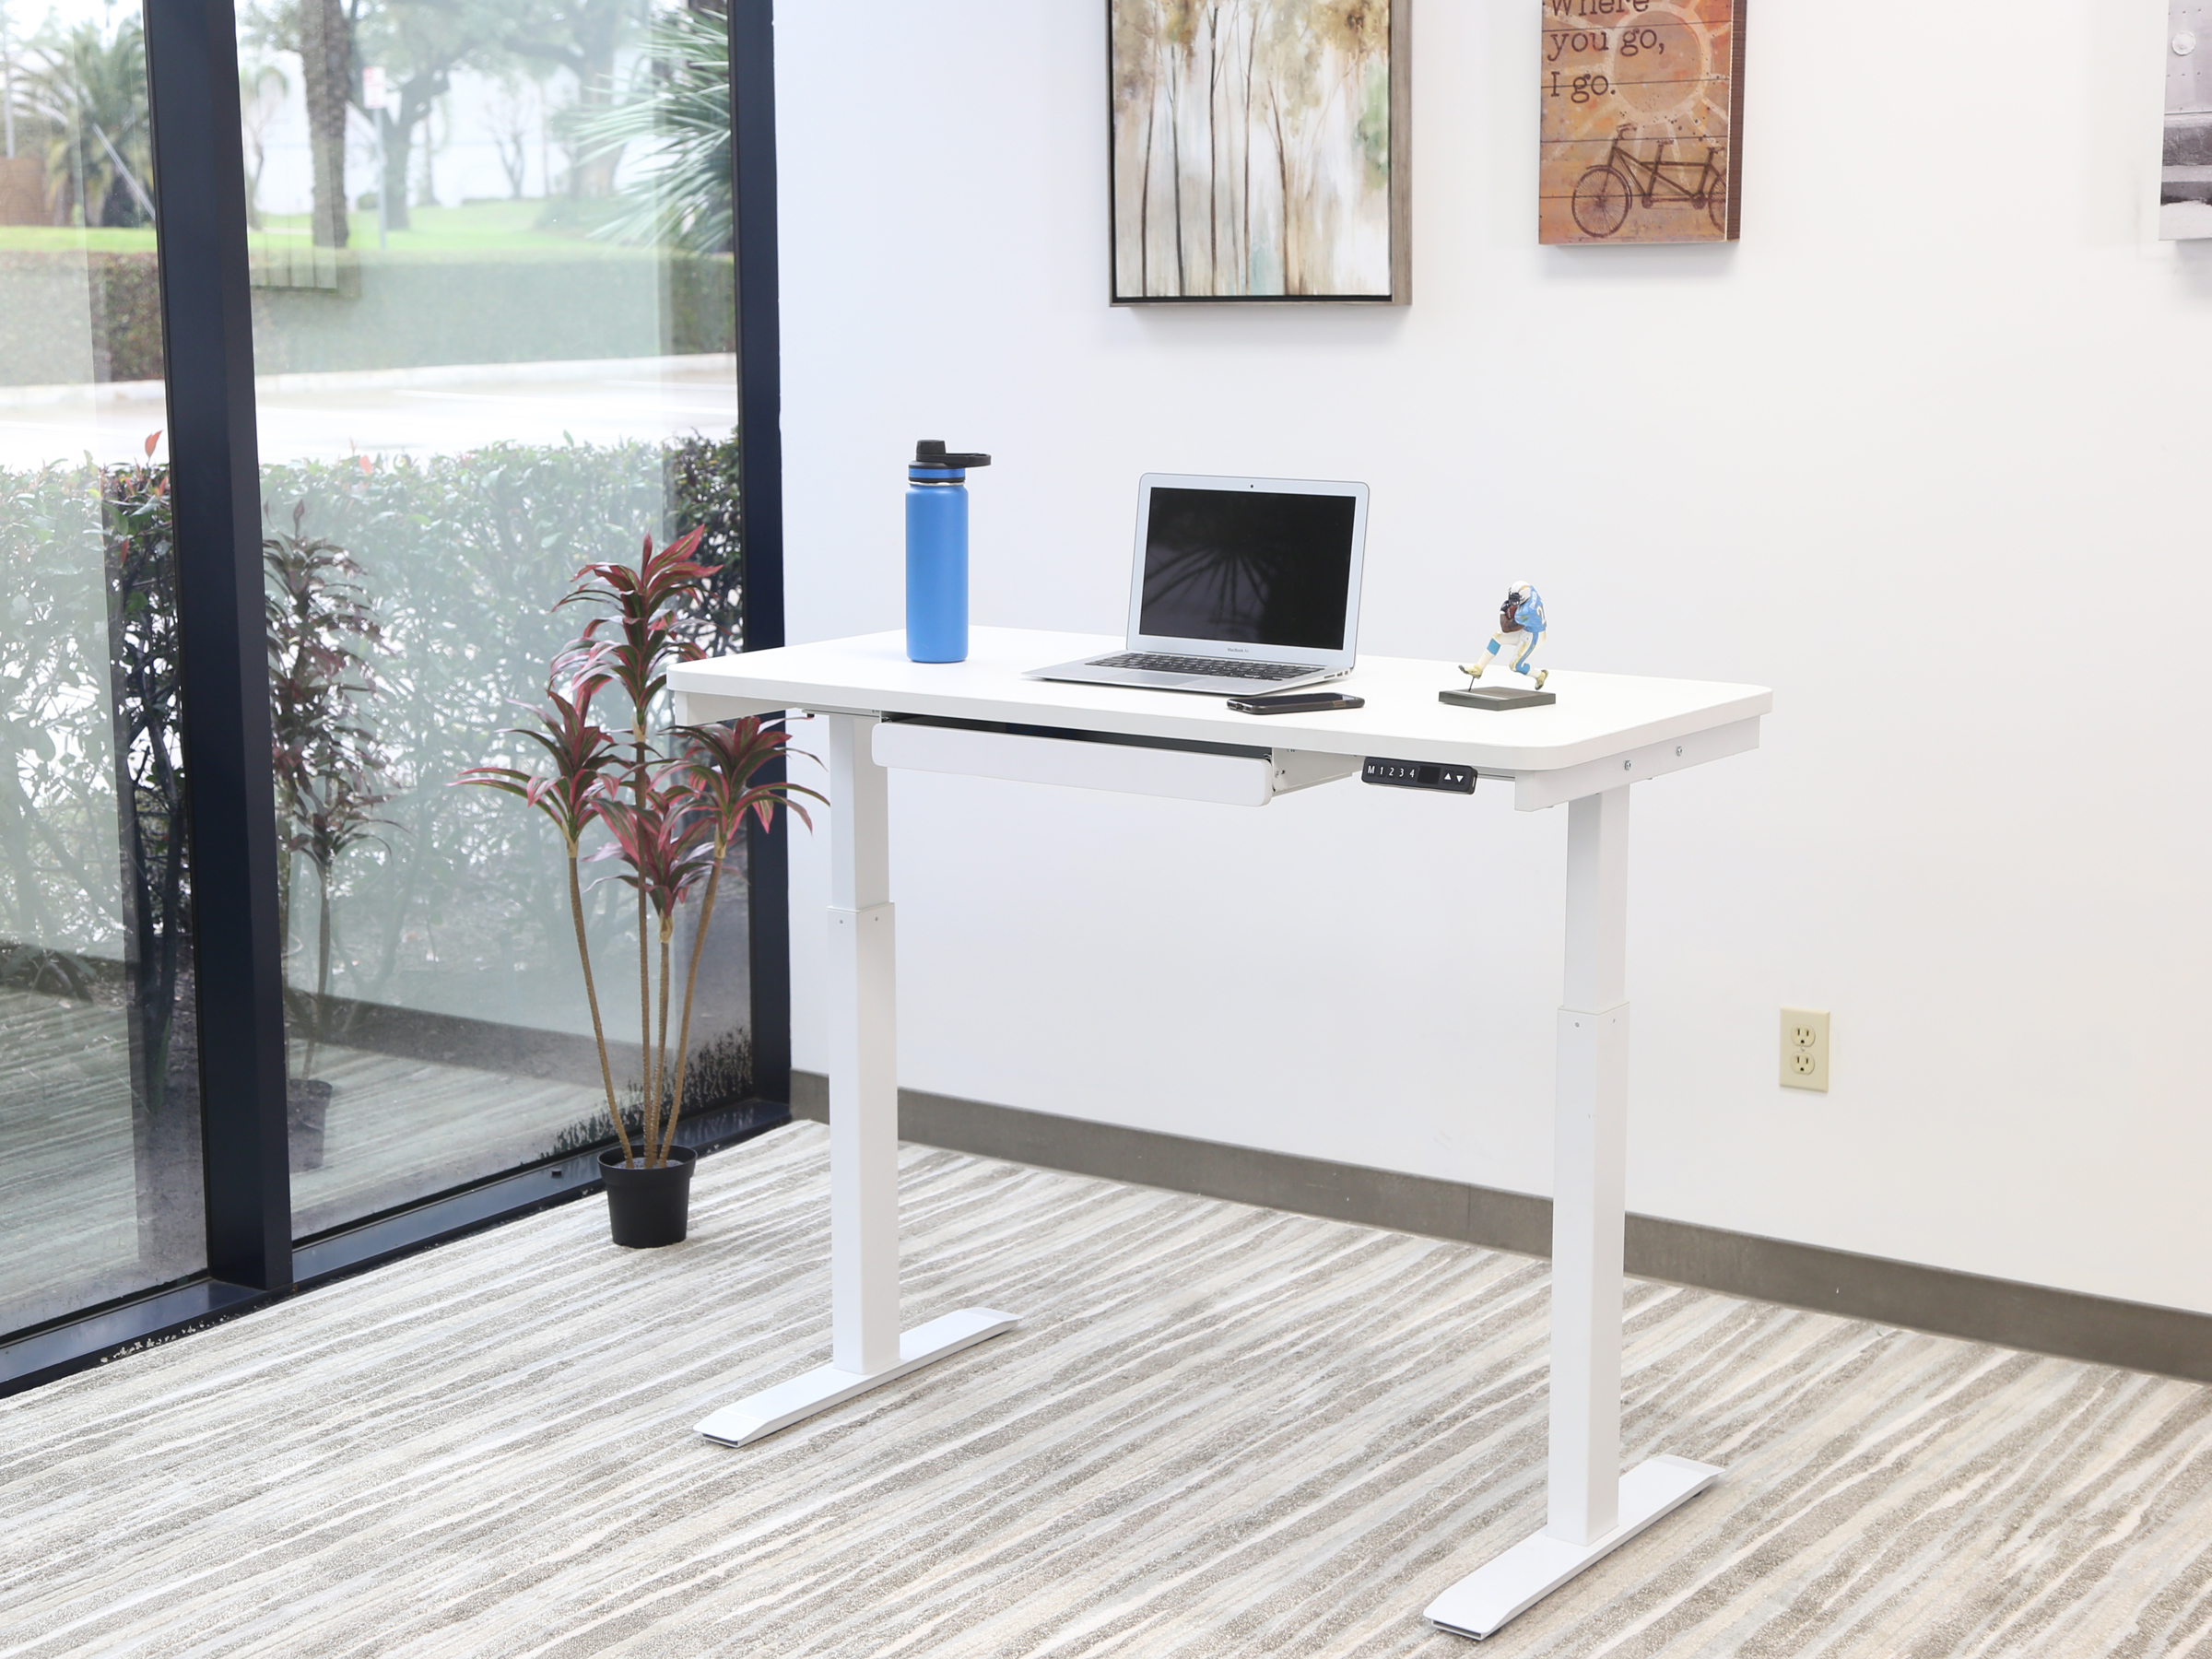 Motionwise White Electric Height Adjustable Standing Desk, 24”x48", Height Adjustable 28"-48" with 4 pre-set height adjustments and USB Charge Port, Multiple Colors - image 1 of 14